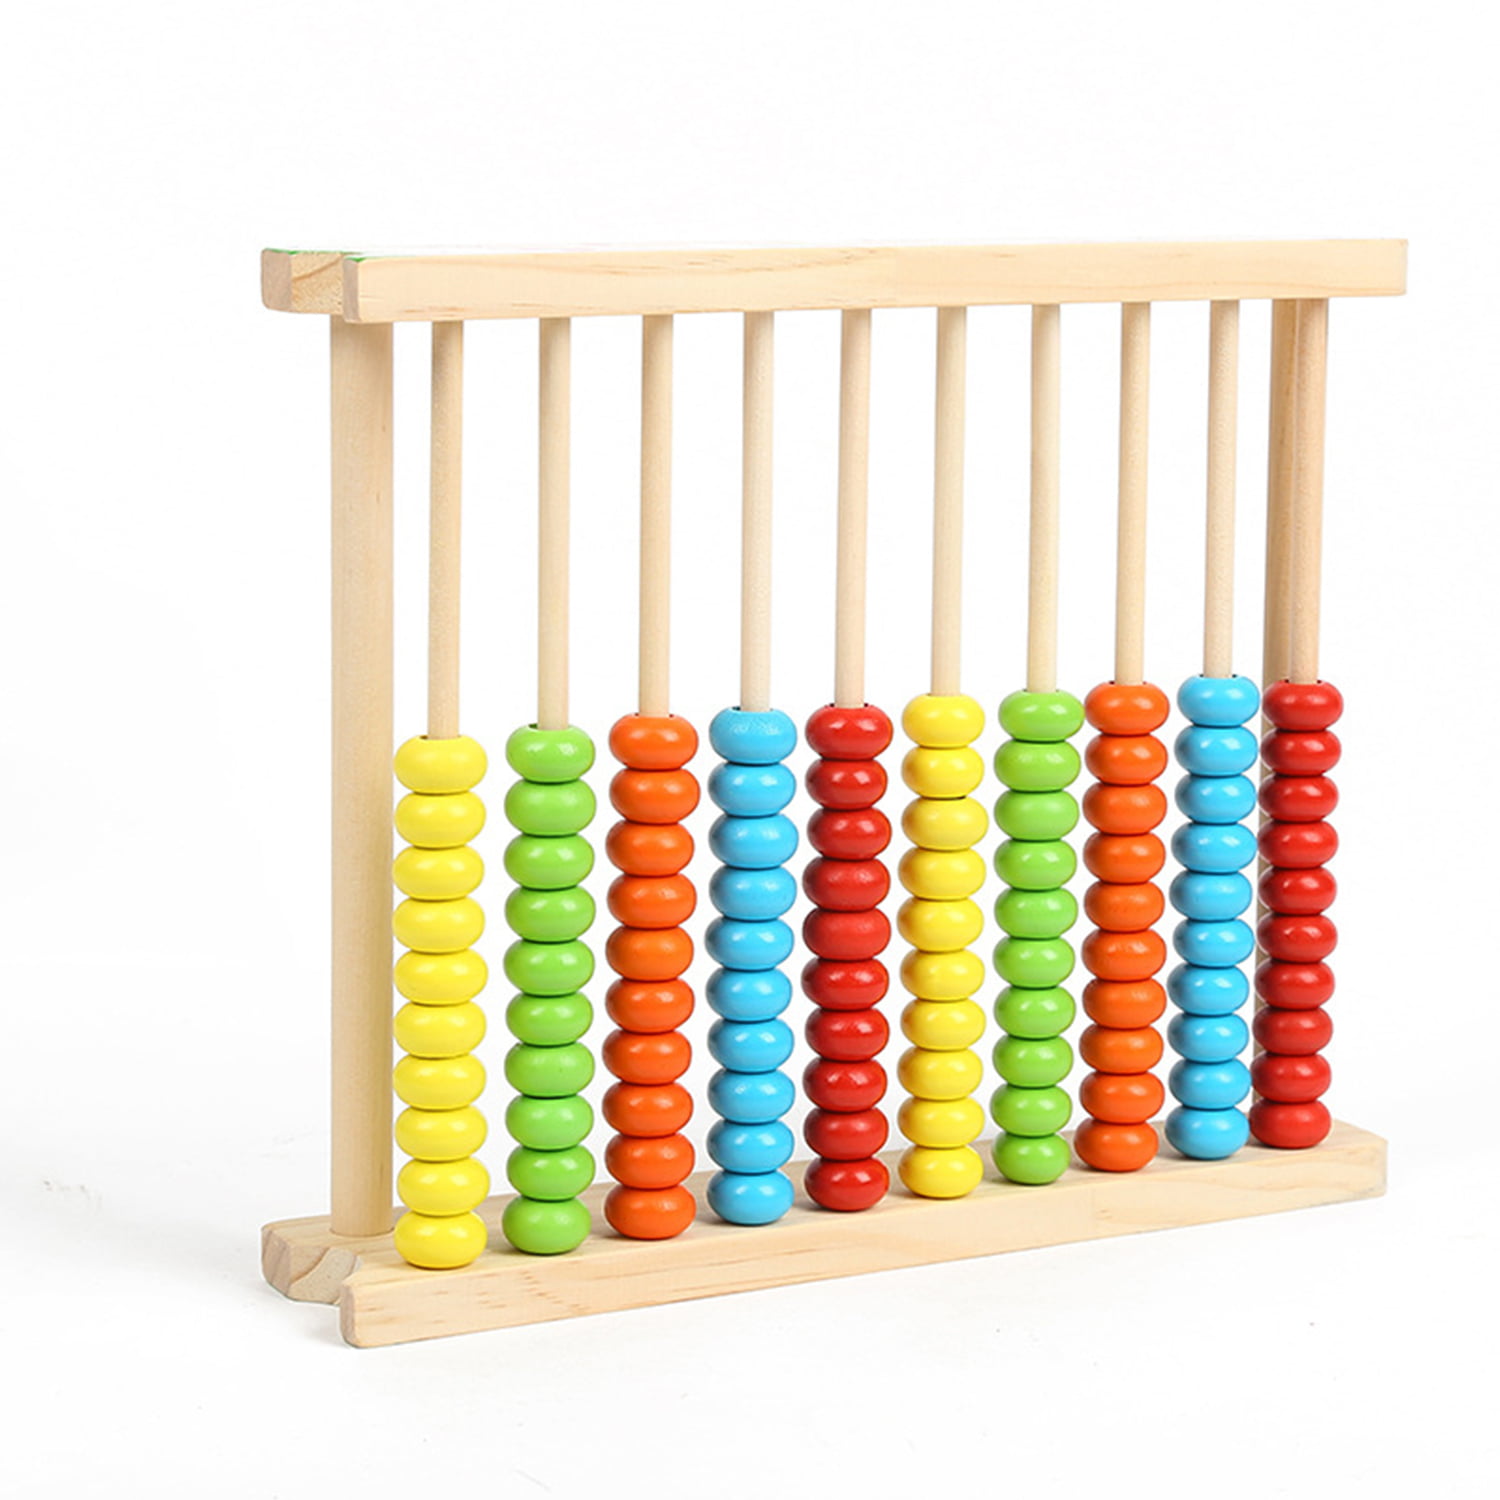 Wooden Abacsu 5 Frame Counter Early Educational Couting Toy 50 Beads for Kids Toddlers Preschoolers 